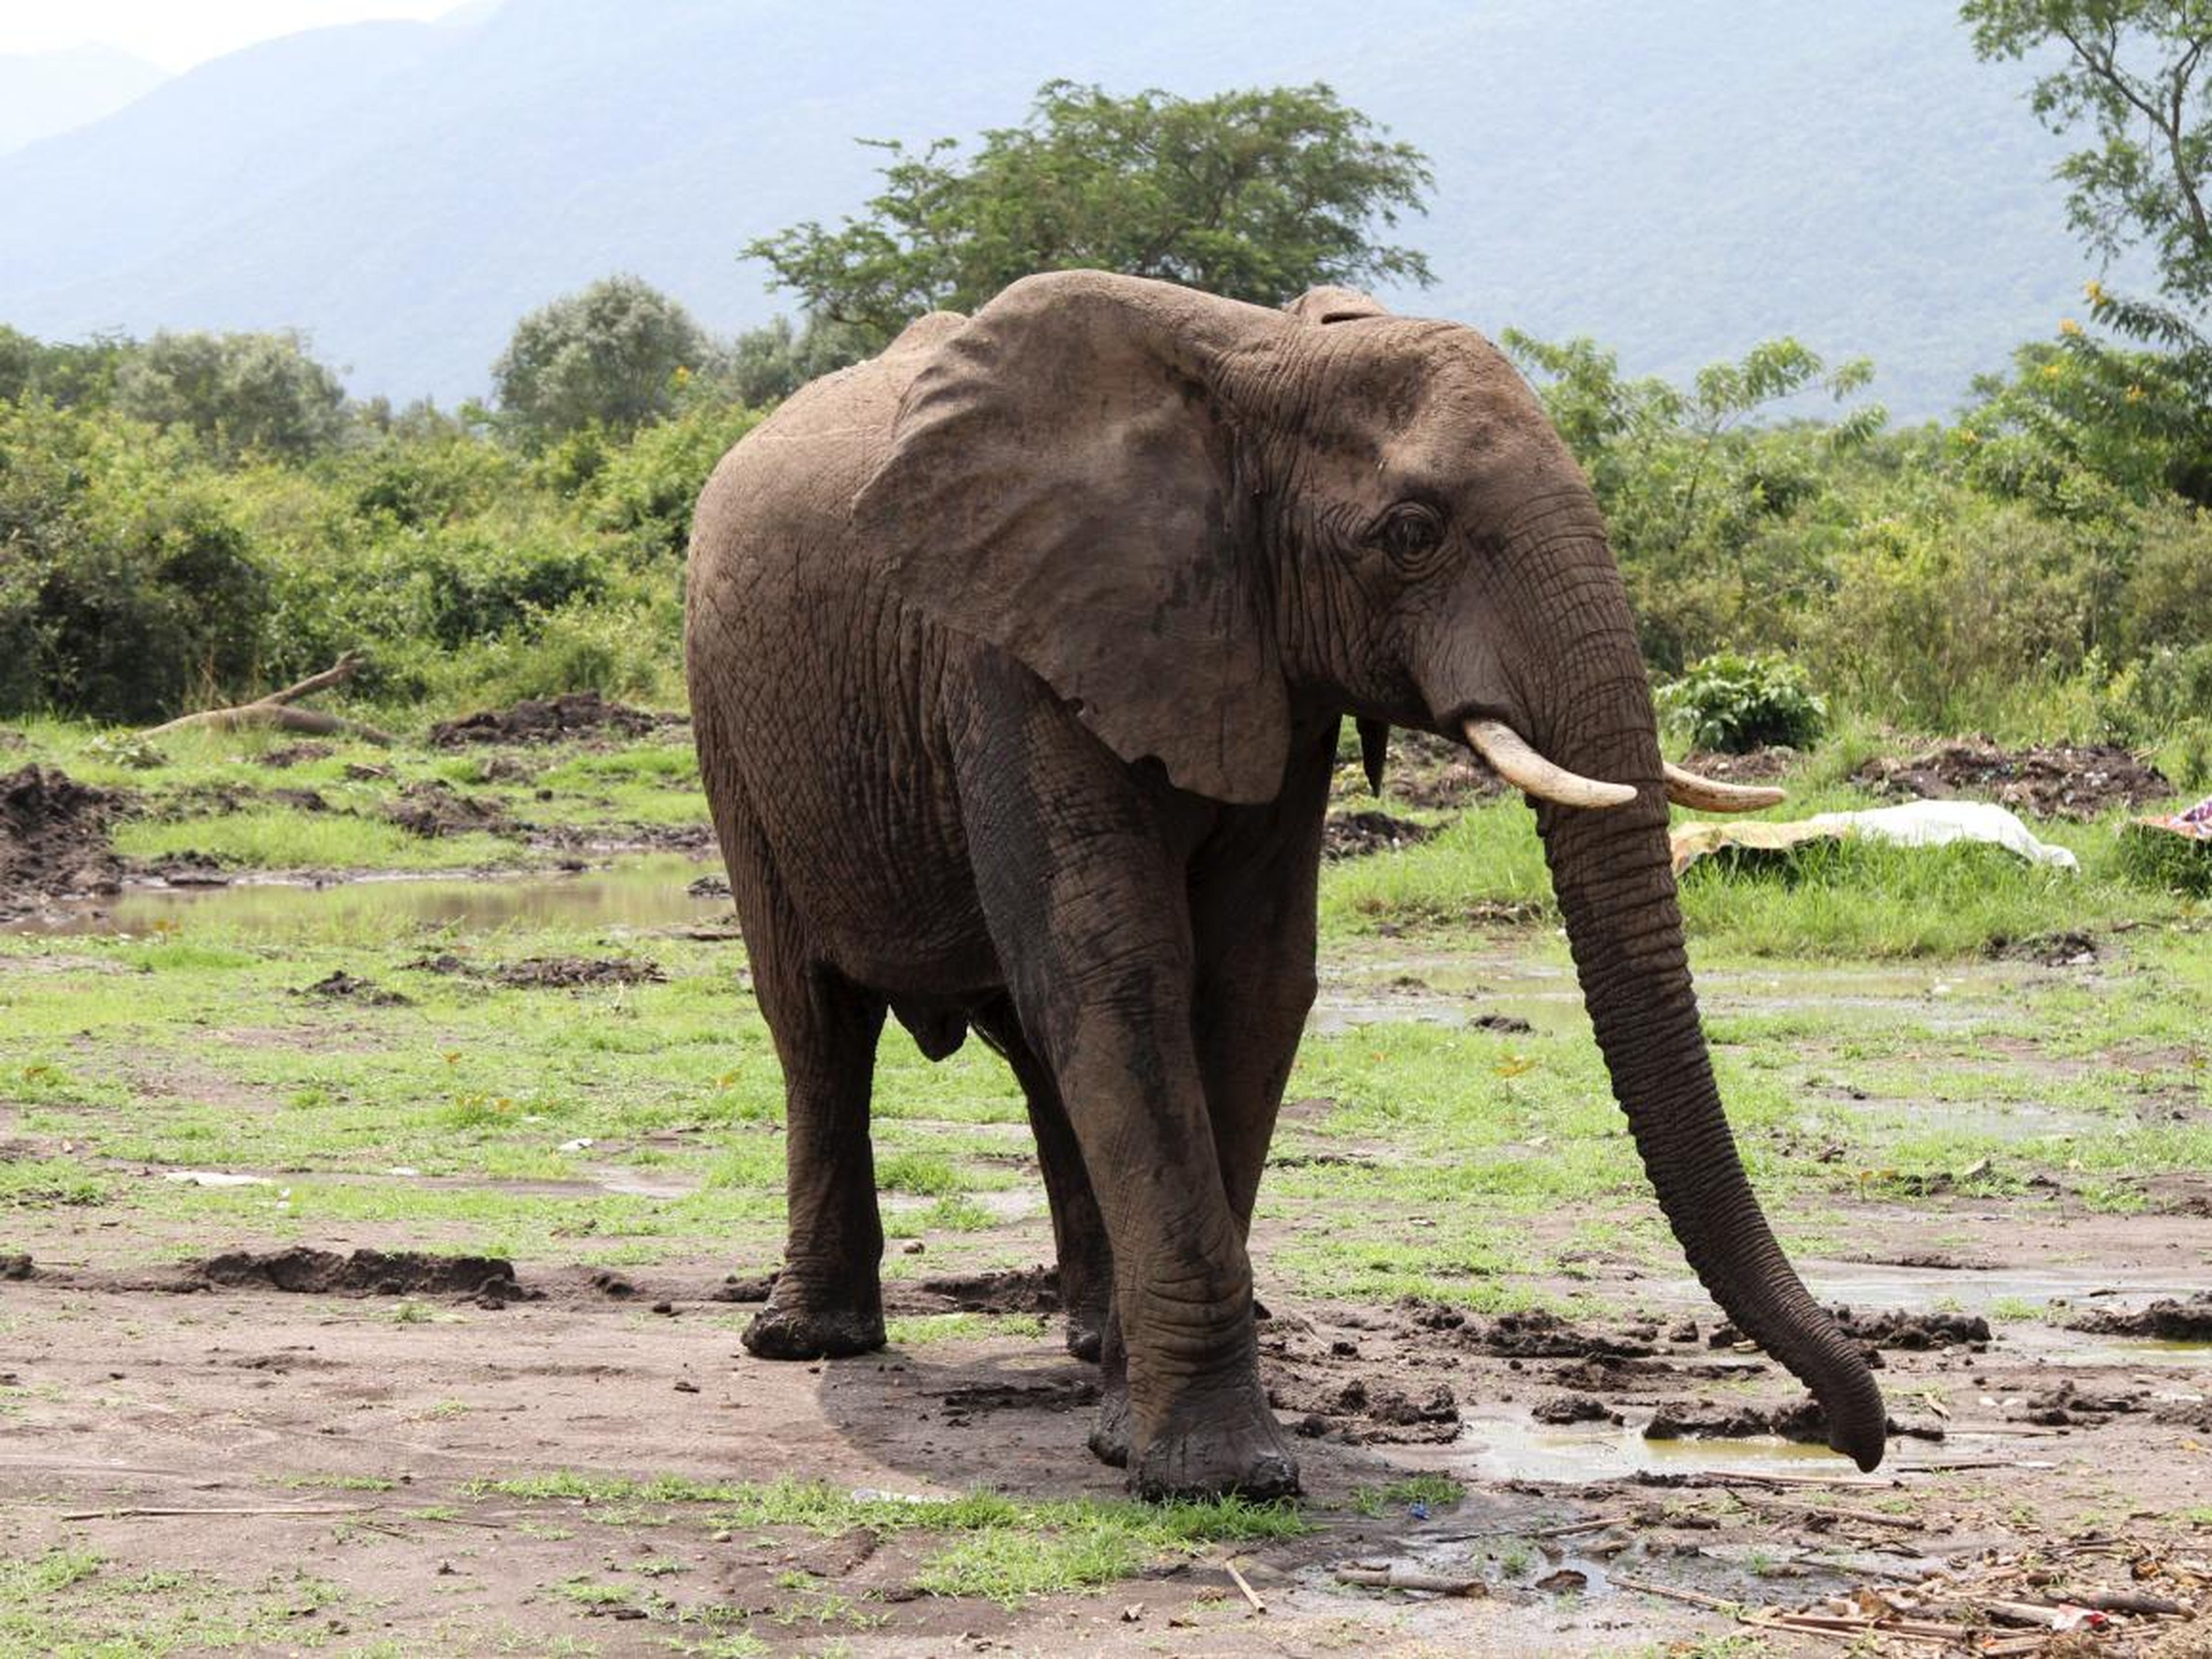 African elephants like this one are frequent victims of poaching and are vulnerable to extinction.